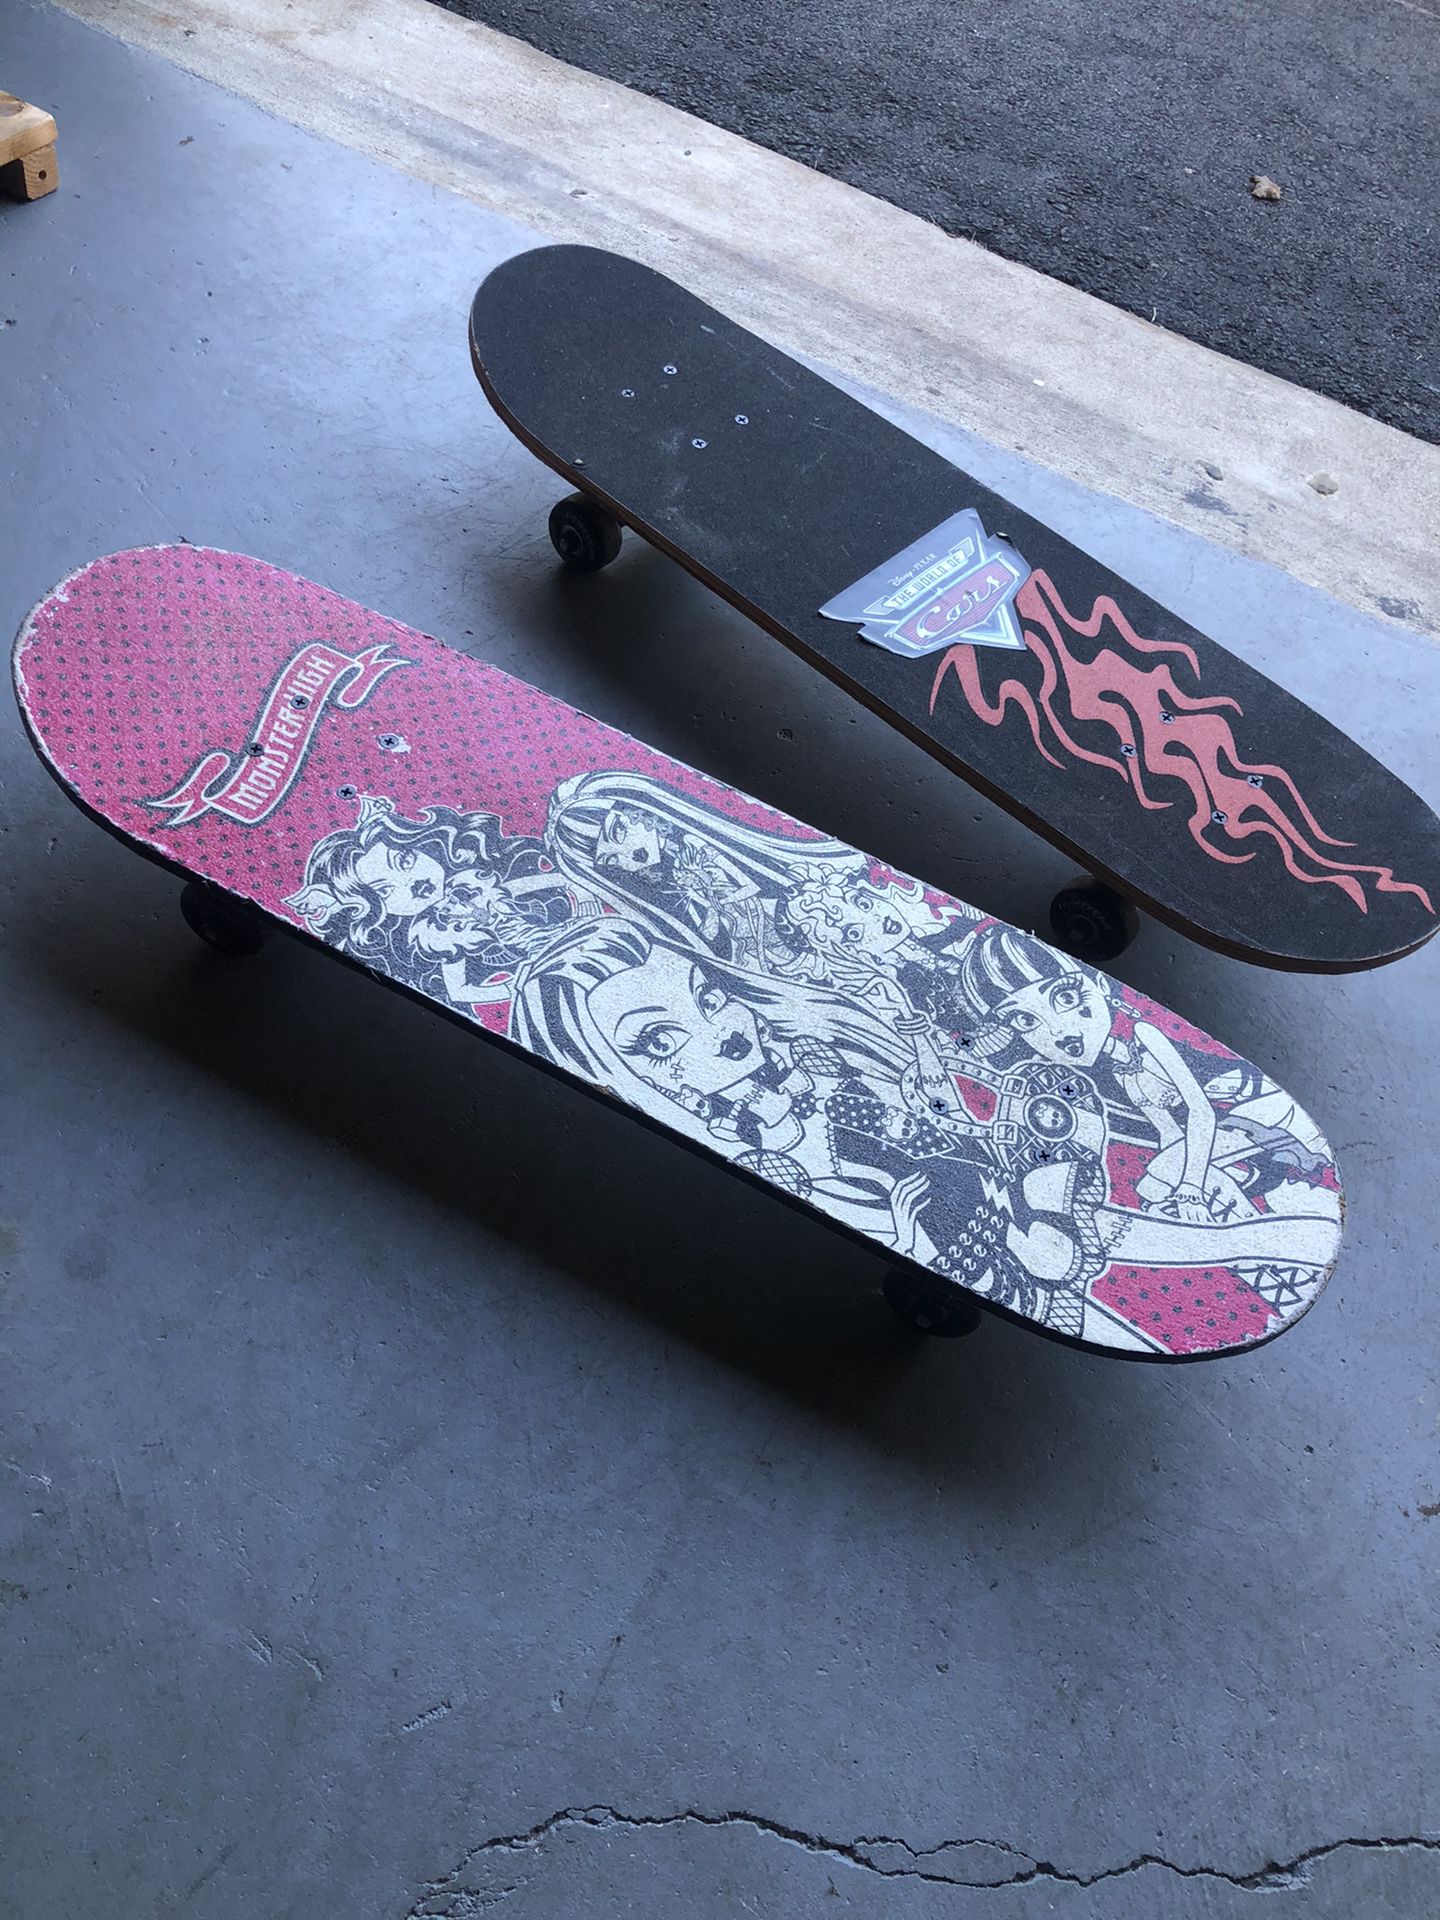 Monster high skateboard ( cars one is already SOLD)